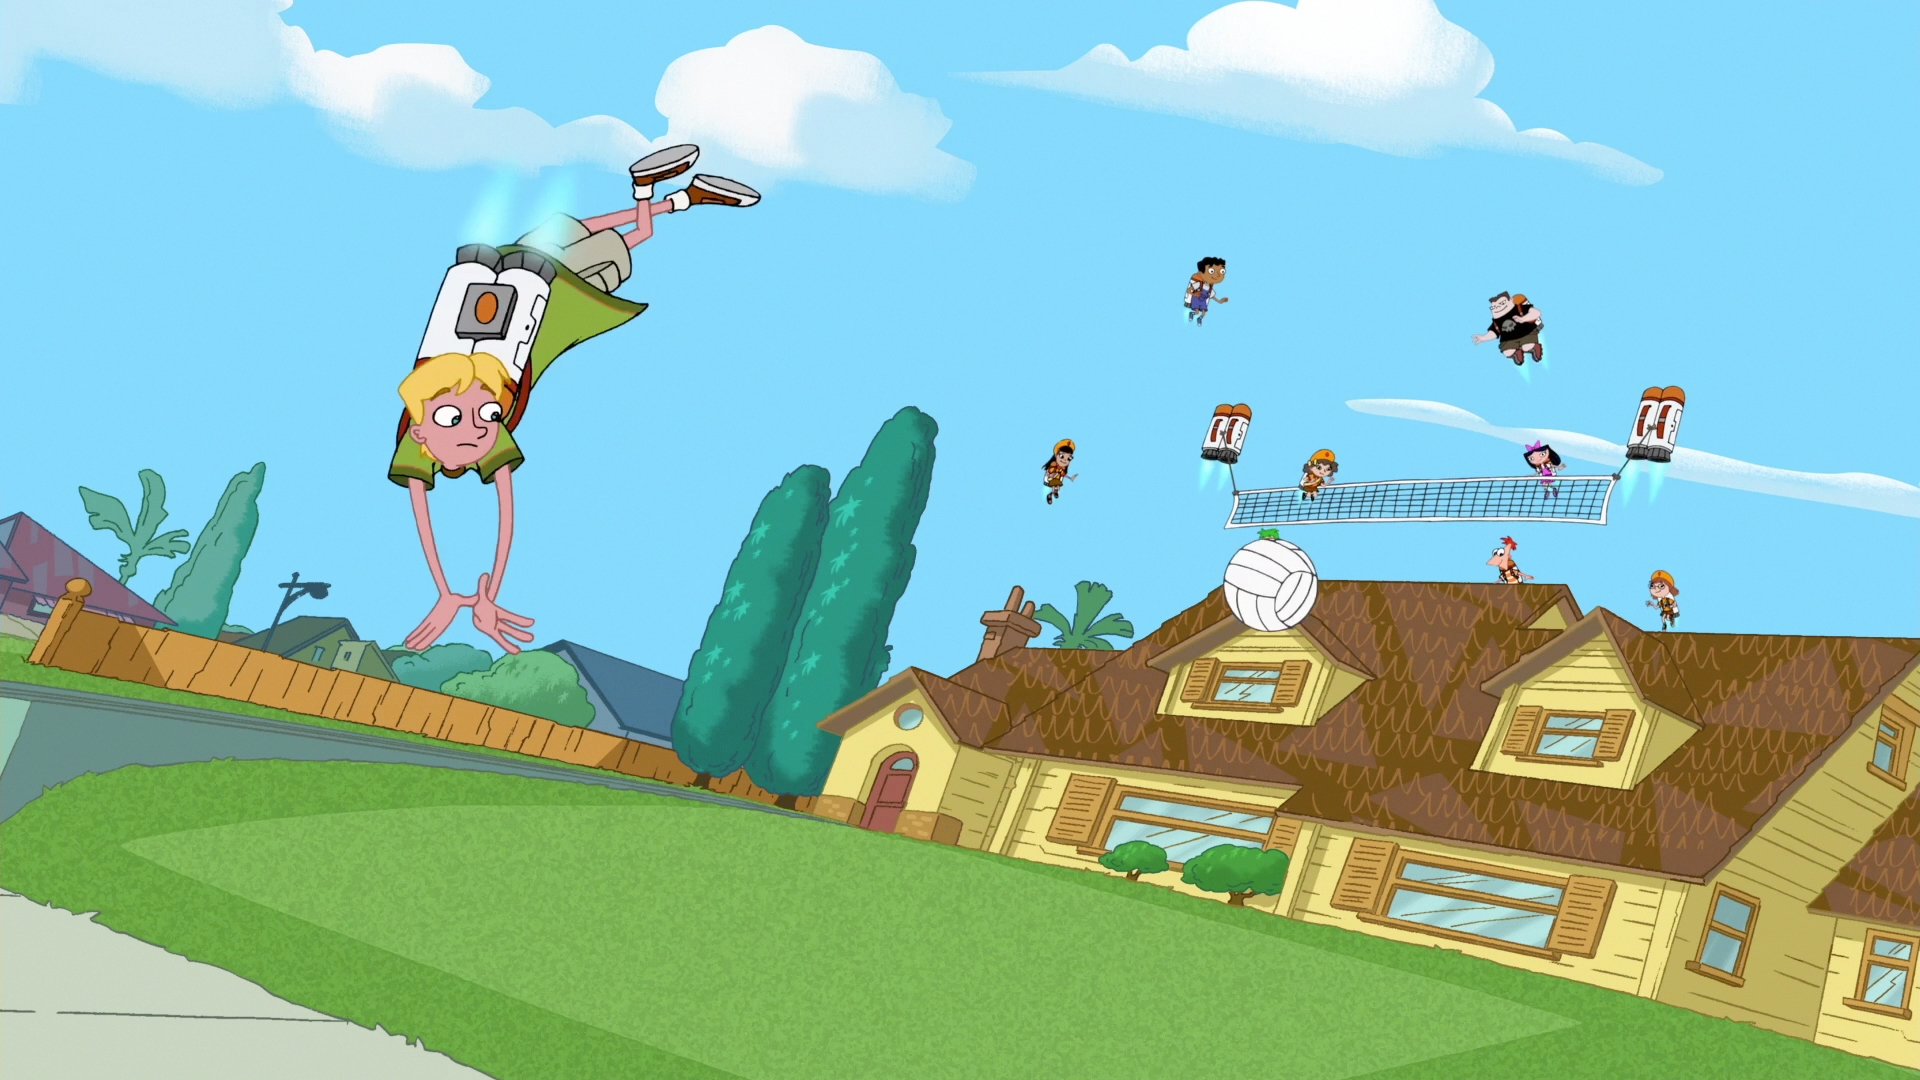 Jetpack Volleyball | Phineas and Ferb Wiki | Fandom powered by Wikia